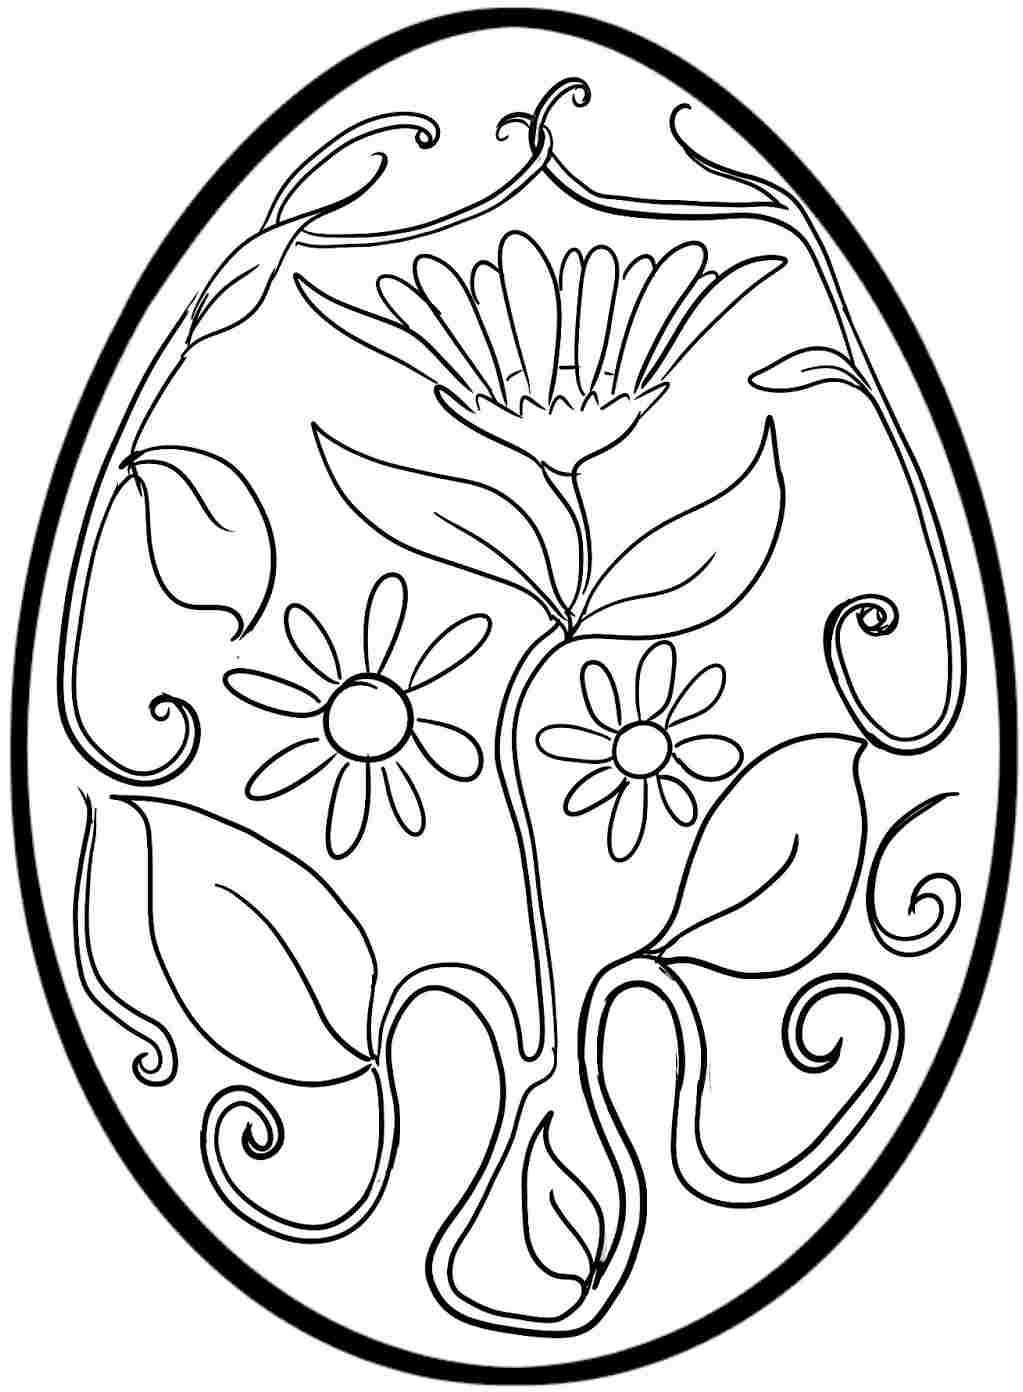 Easter Egg With Flowers For Adult